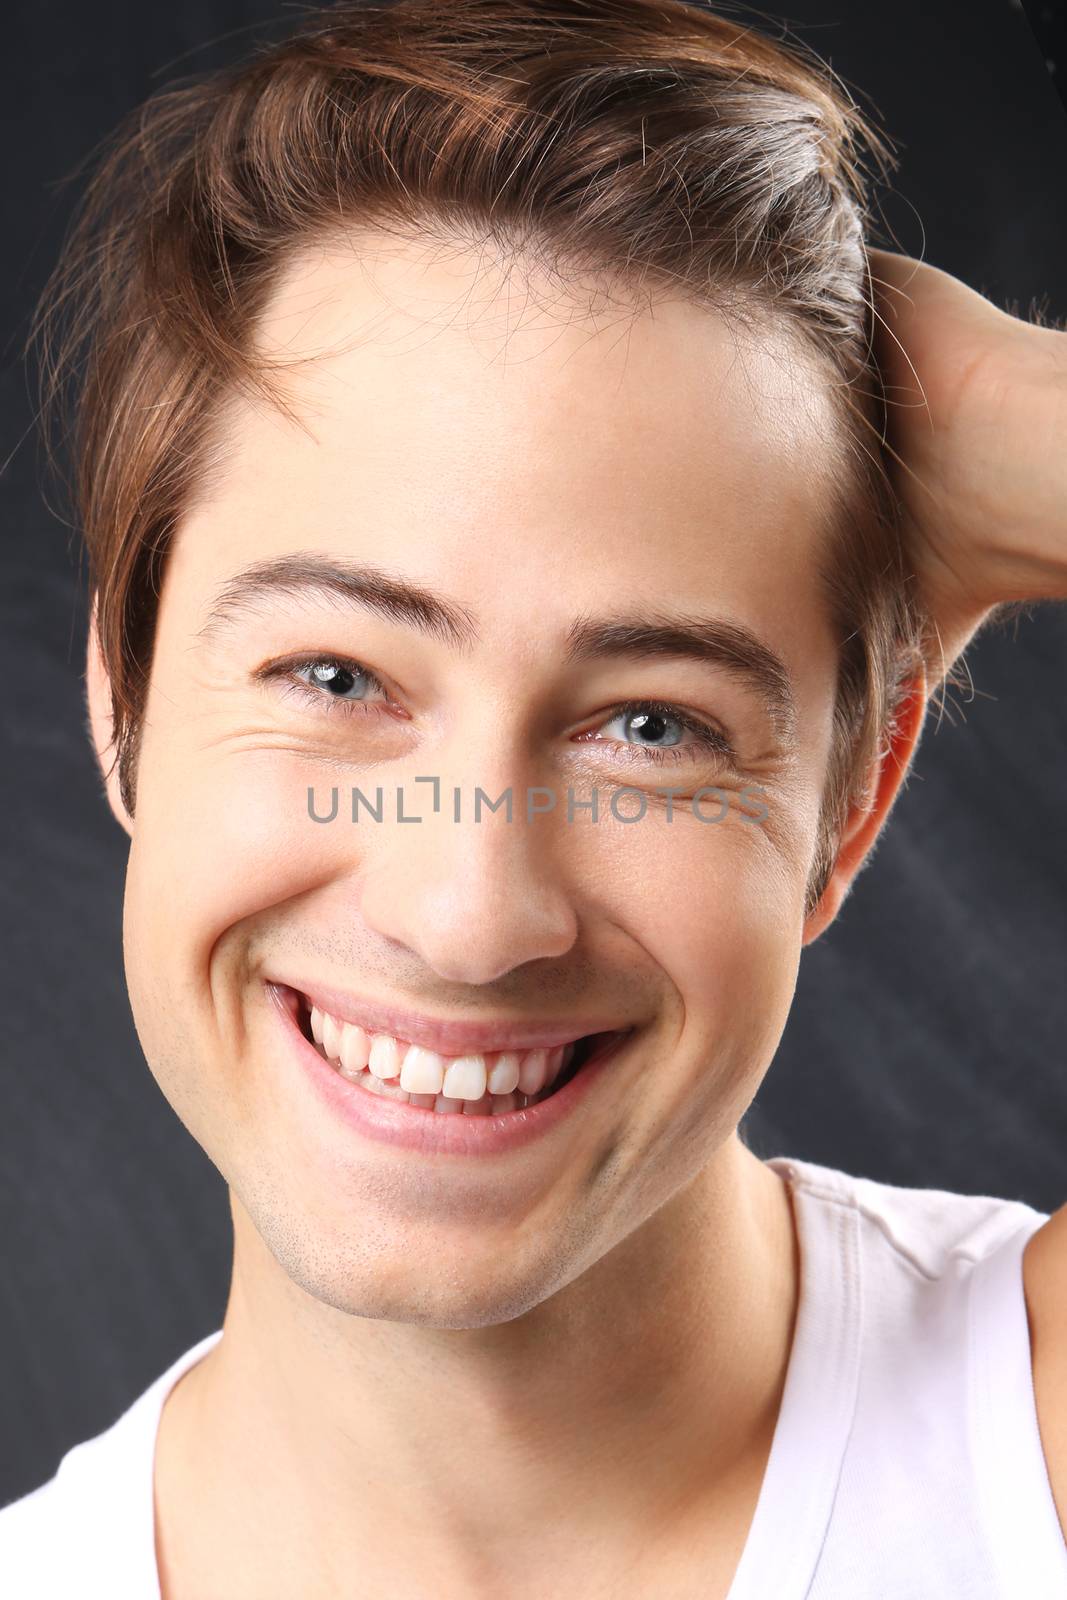 Smiling young man